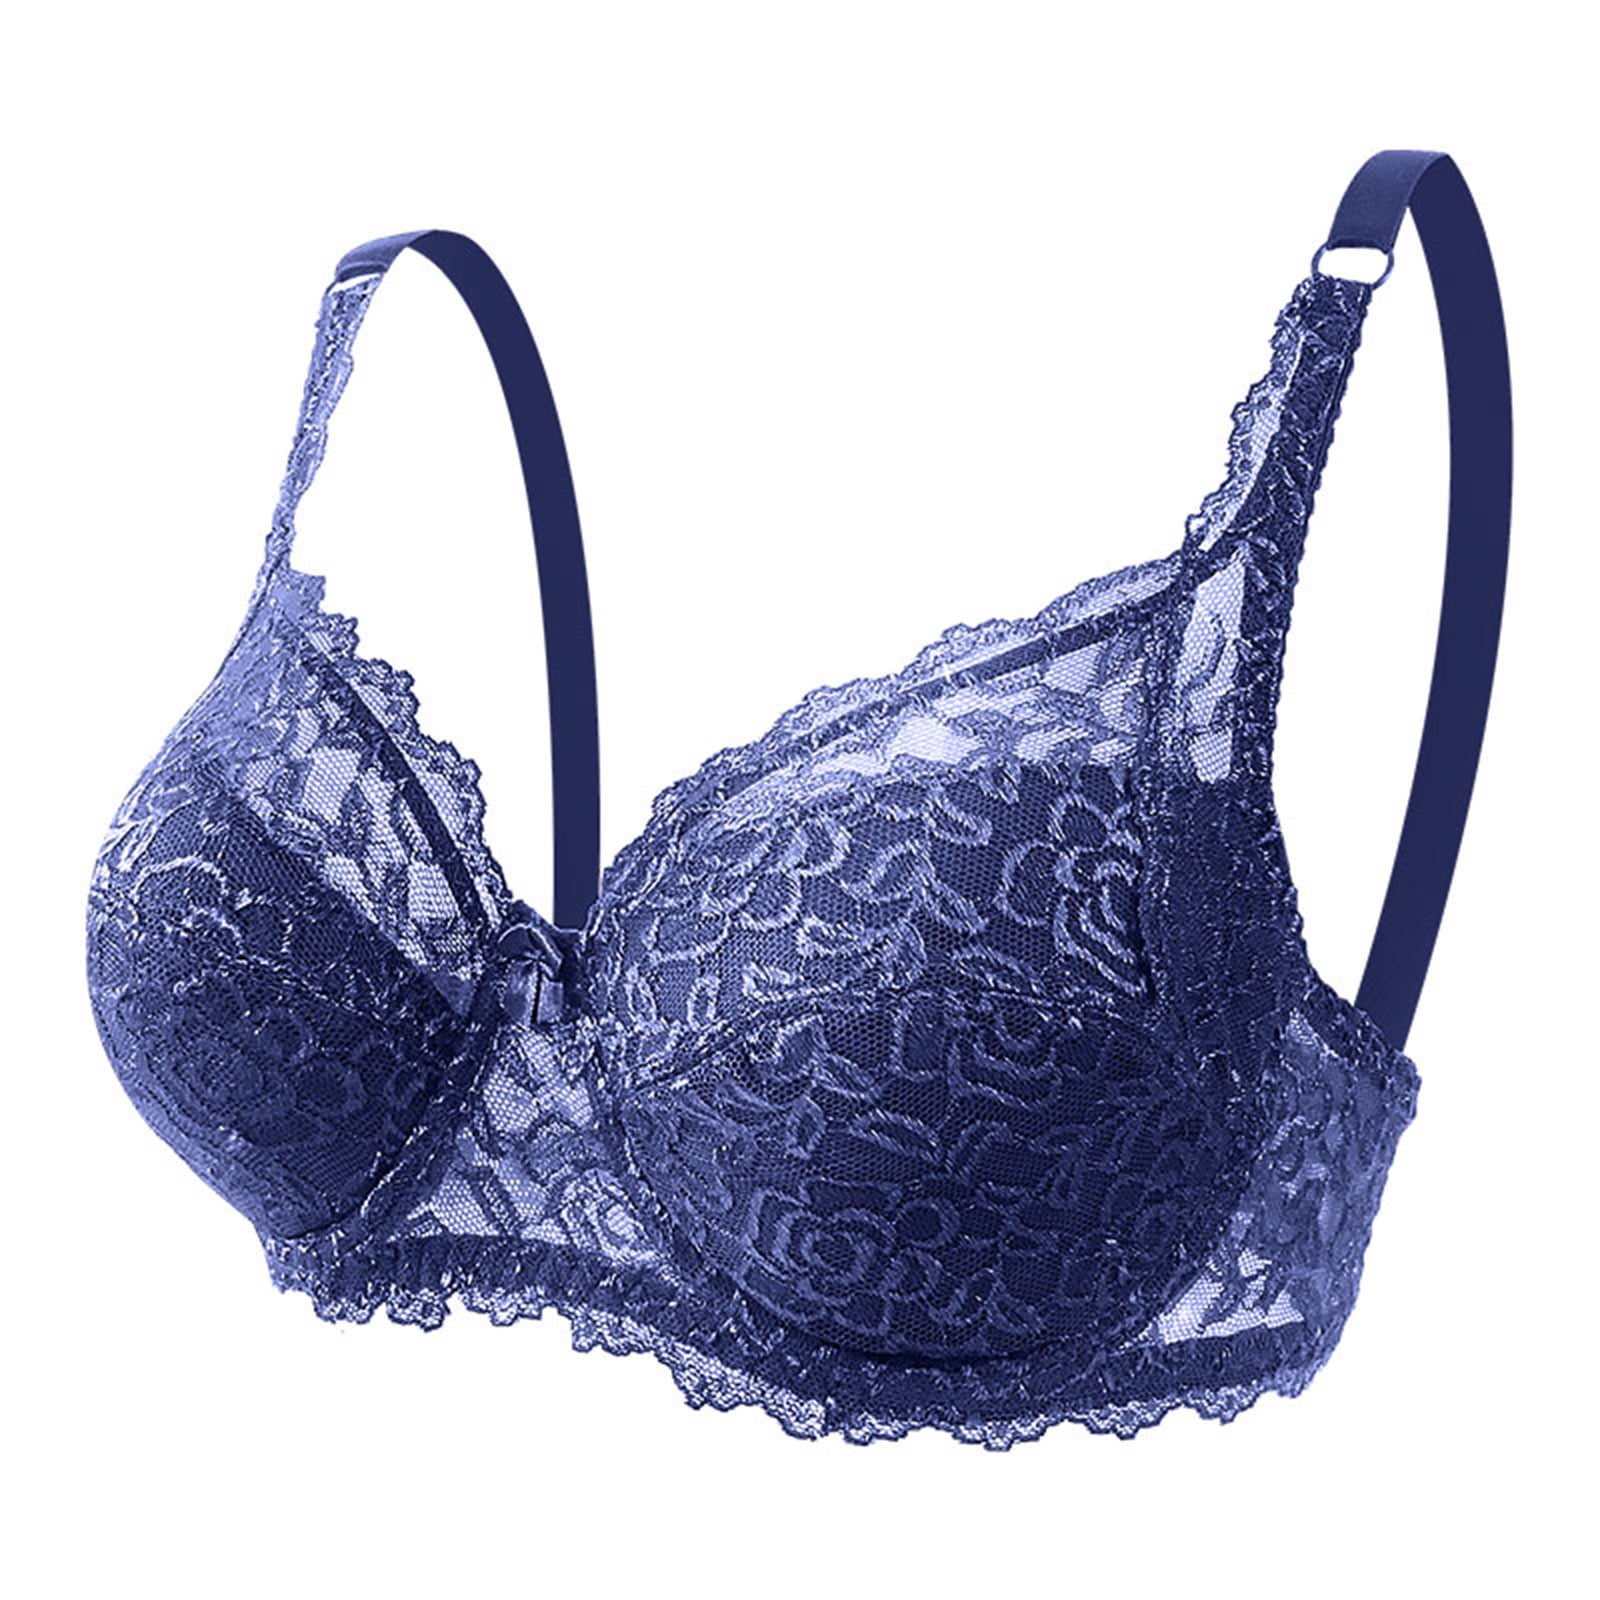 Floral Lace Push Up Chest Amoena Bras Sexy Lingerie For Women With Massage  Cup And Small Size Perfect For Breasts Style 220511 From Long005, $4.99